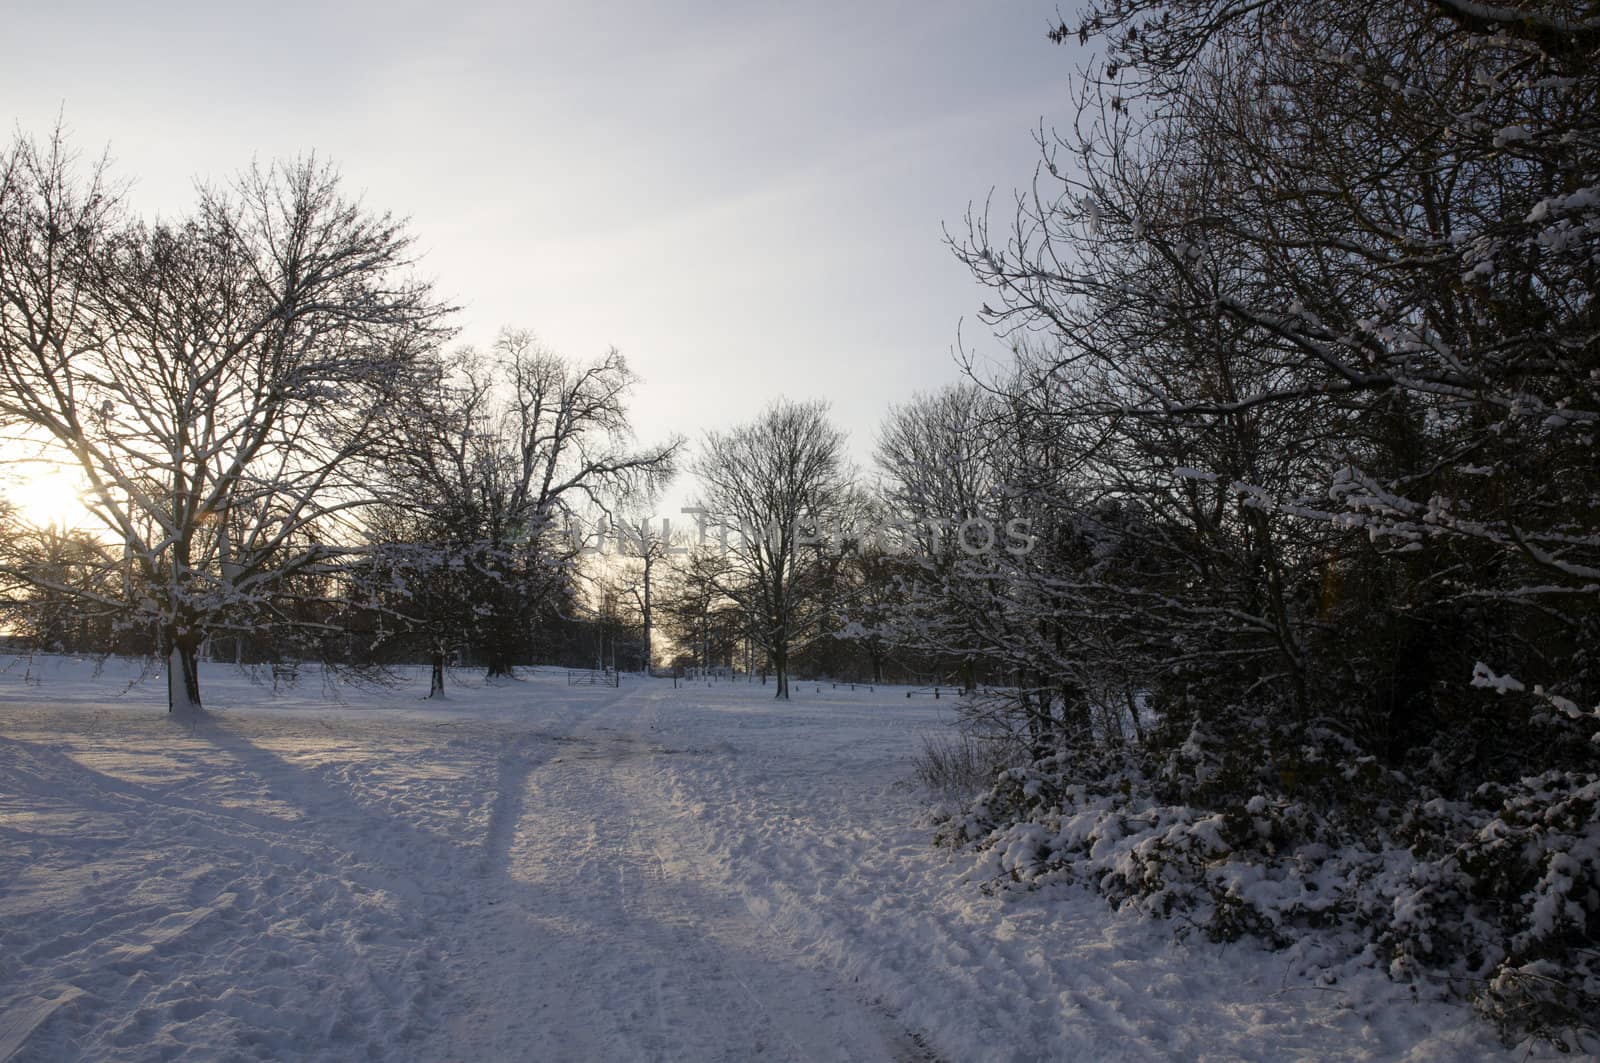 A view of a park covered in snow on the ground and trees